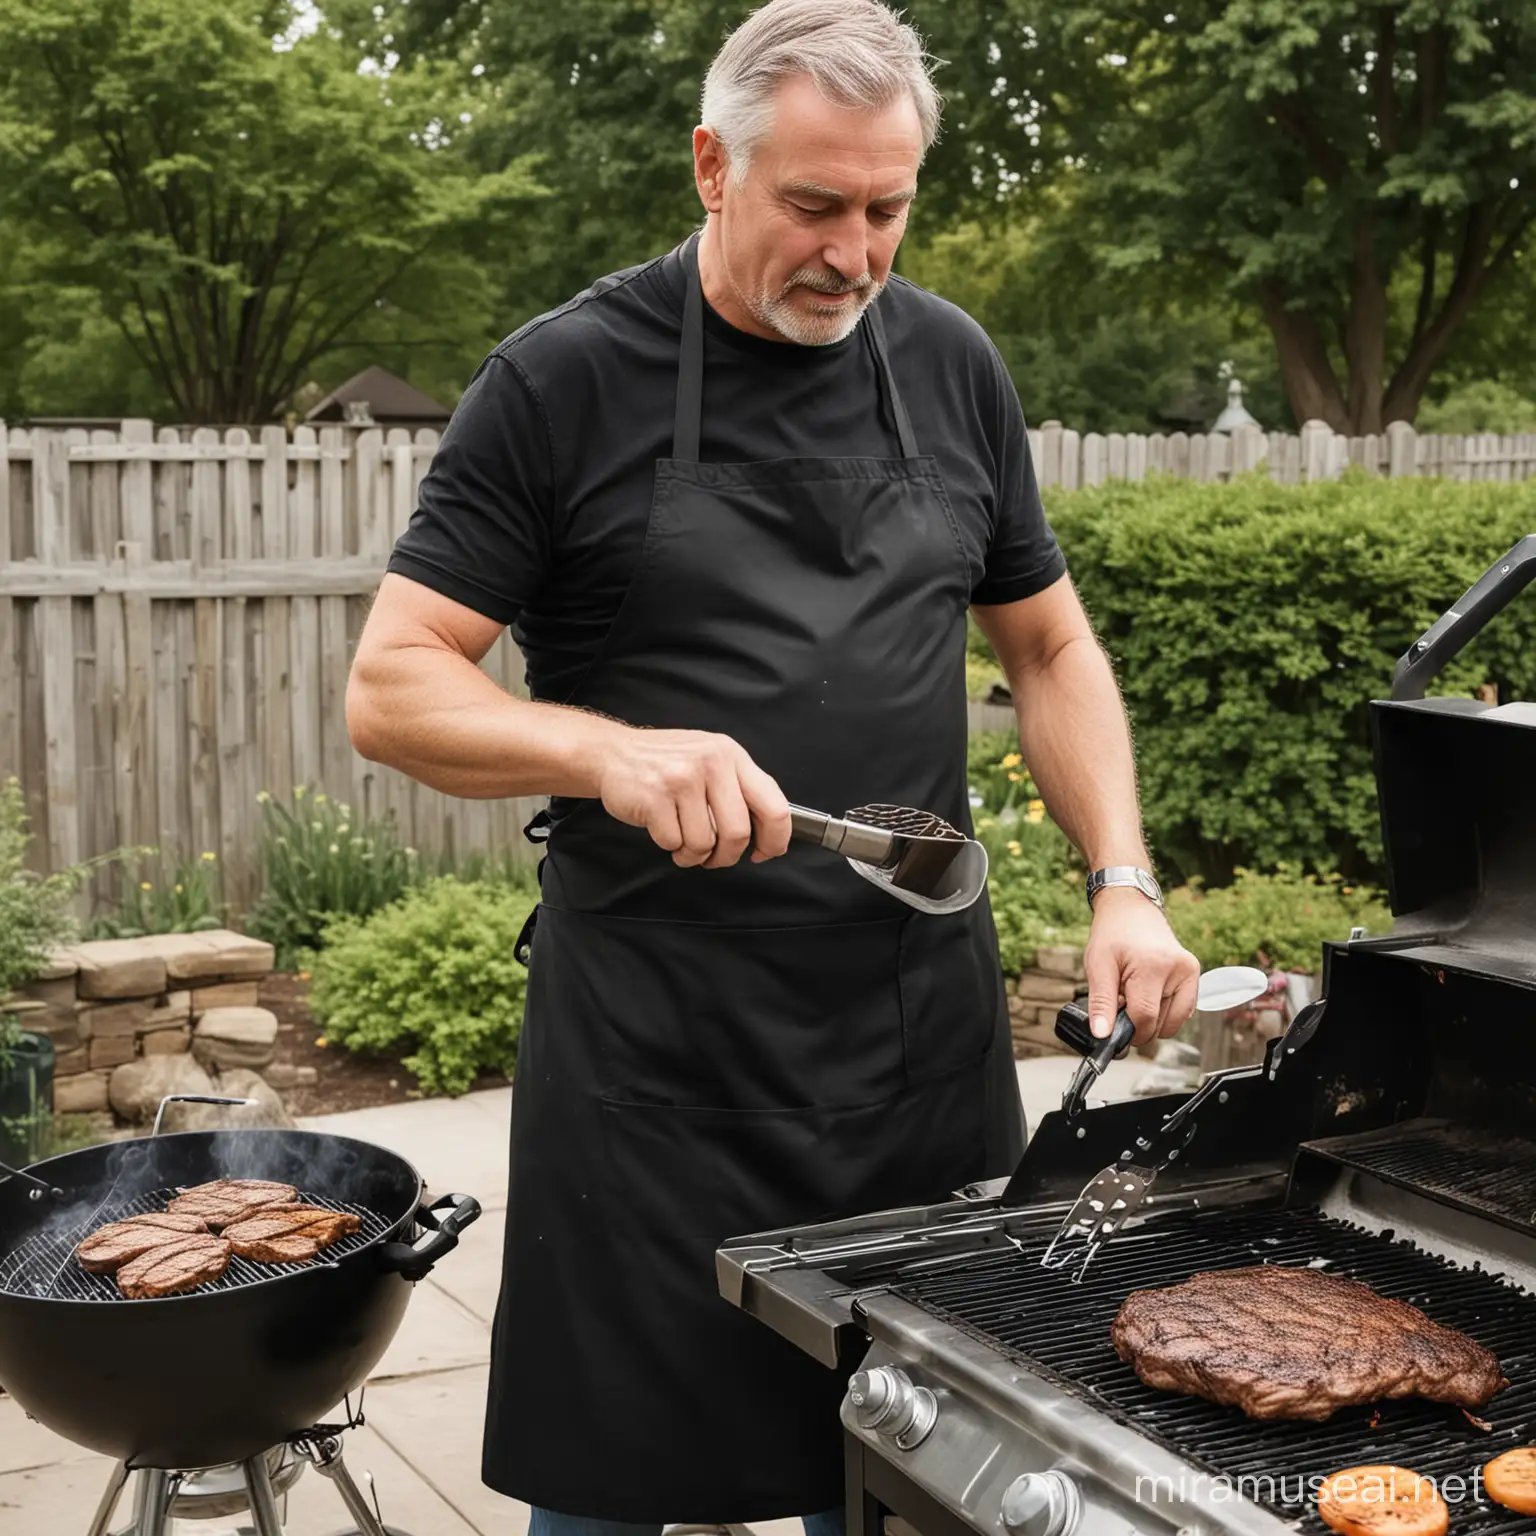 Senior Man Grilling Outdoors in Stylish Black Apron and Watch